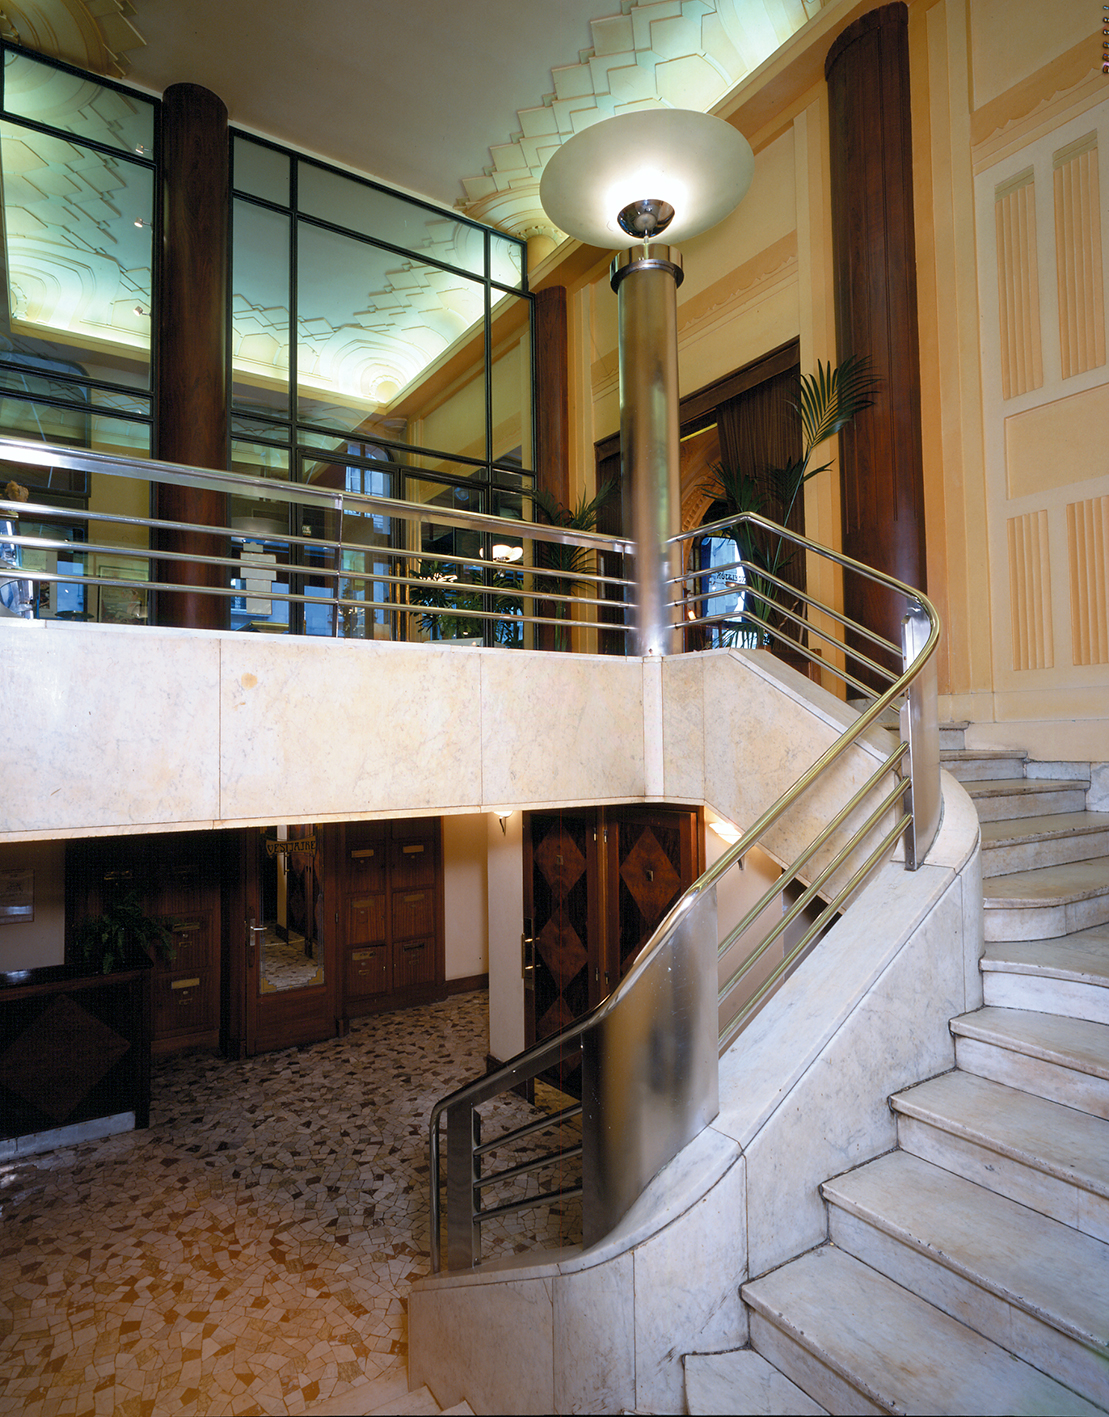 Railing of staircase leading to basement dining-rooms, Brasserie Excelsior, Nancy, 1931.